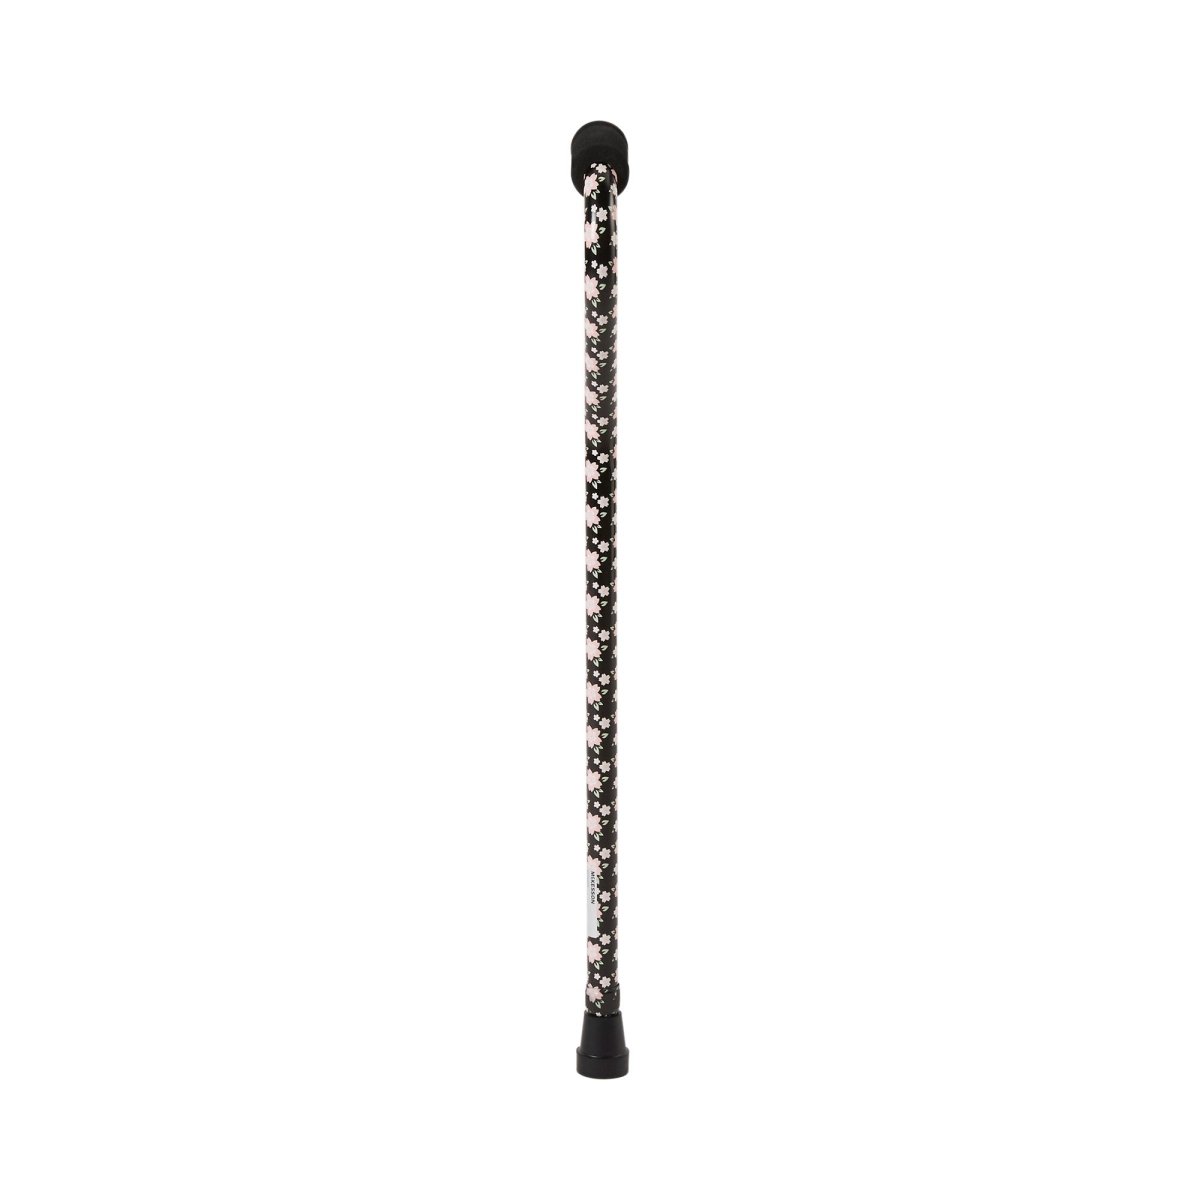 McKesson Pink Floral Offset Cane, Aluminum, 30 – 39 Inch Height - 1103358_EA - 1